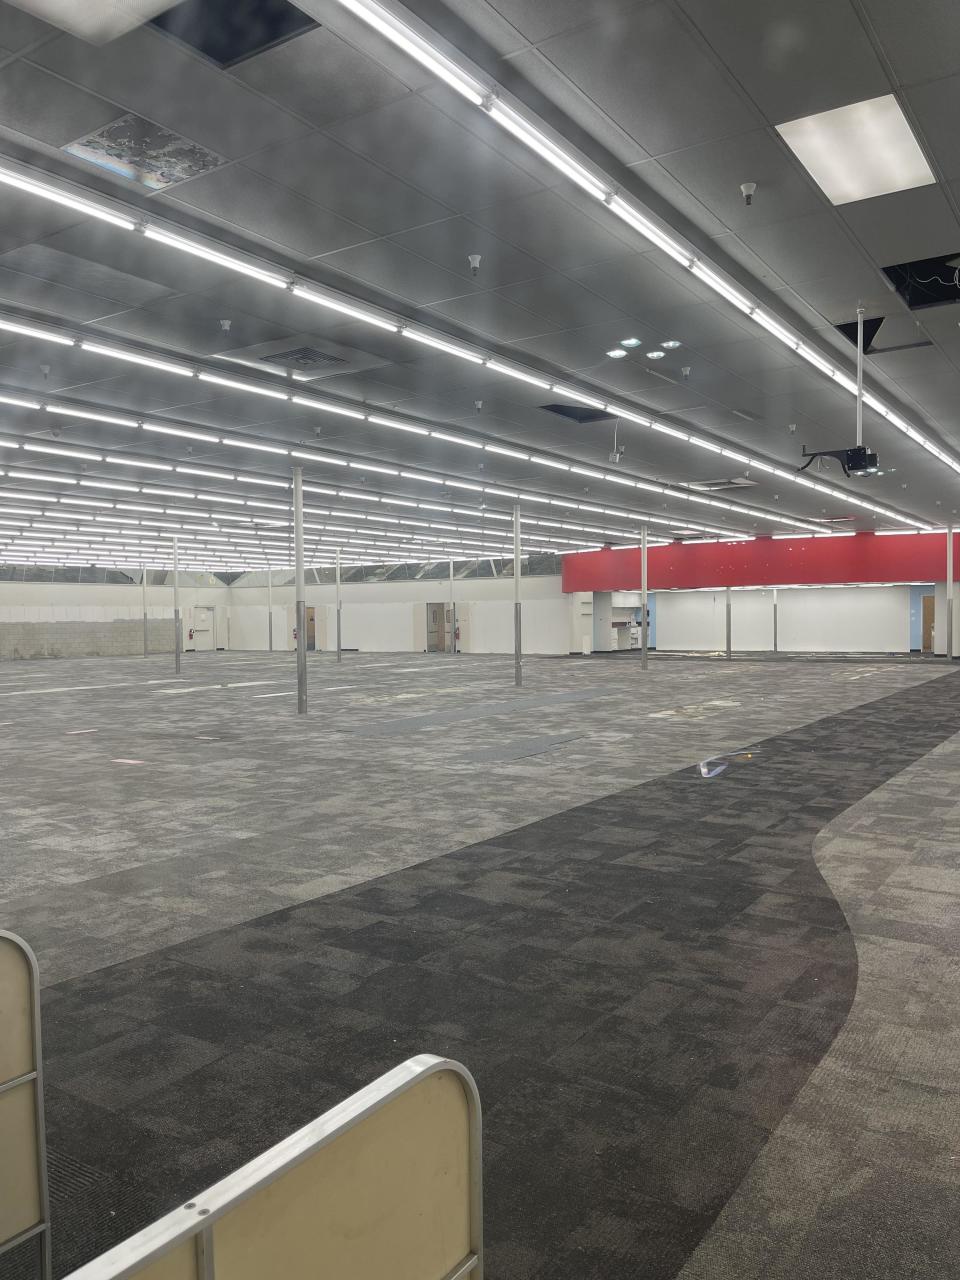 An empty, bare open space without aisles, shelves, checkout, or items for purchase